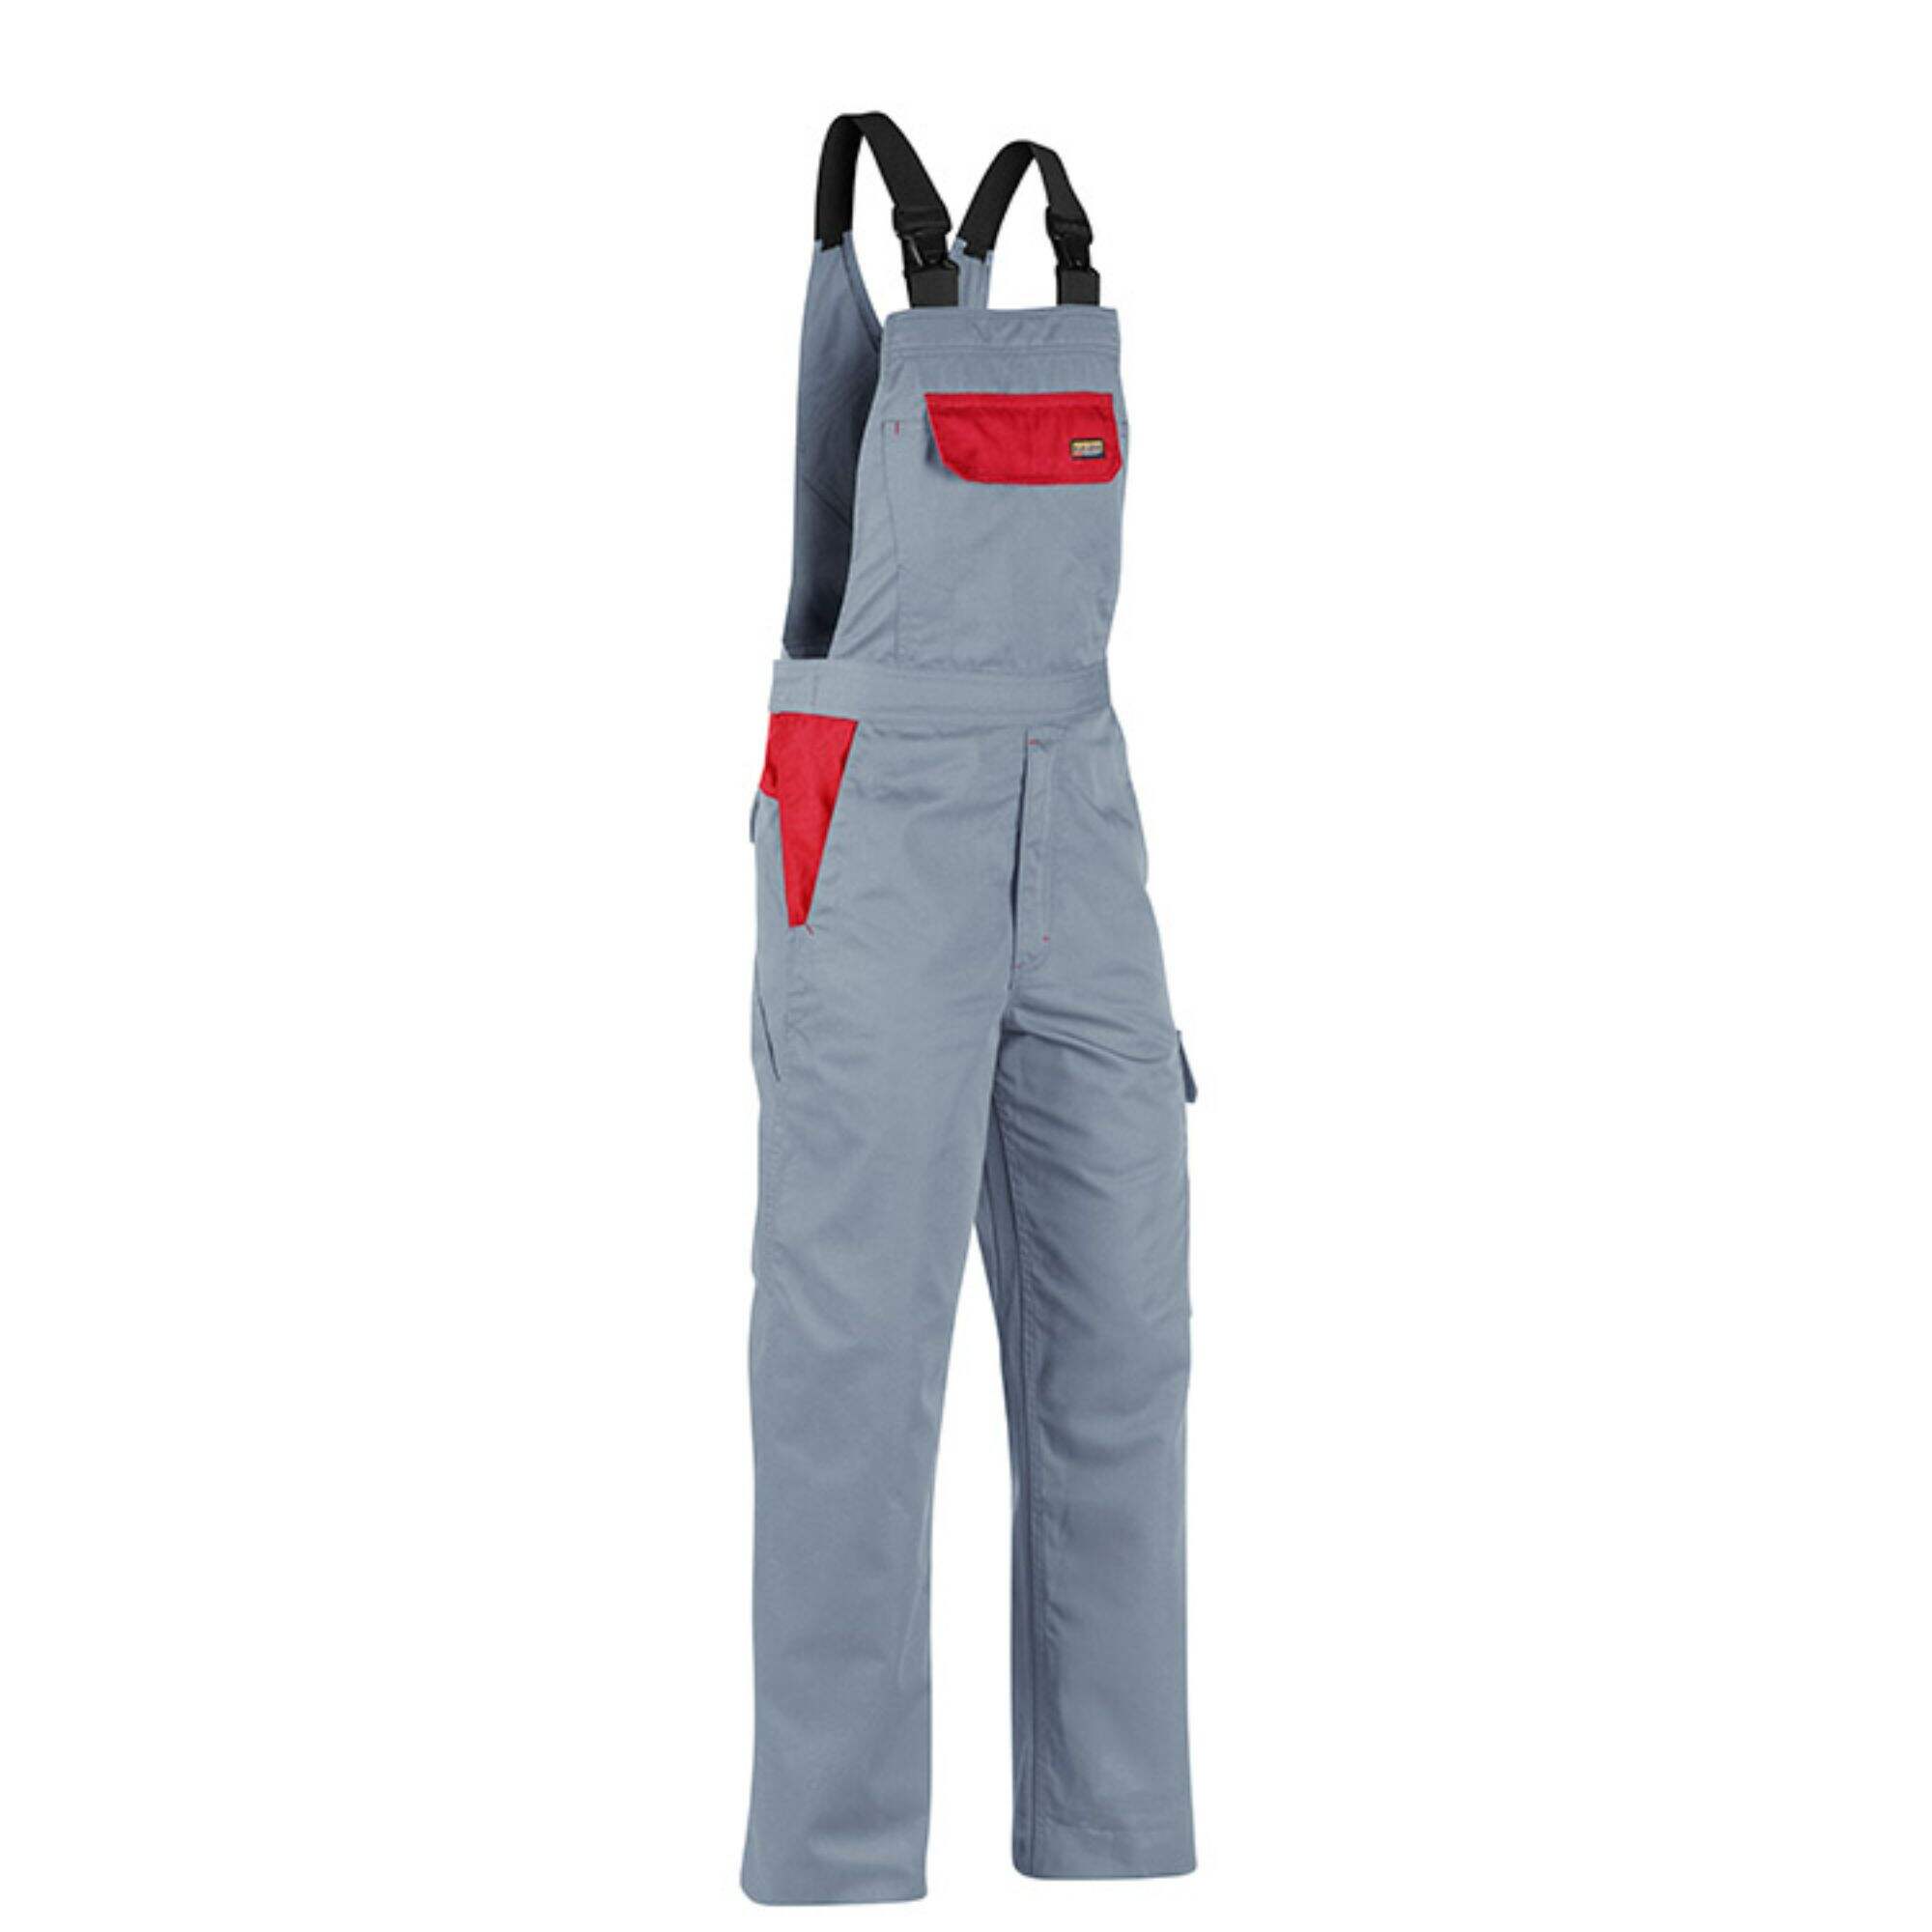 Hot Selling Polyester/cotton Coveralls with pockets each side multi-function tear-resistant Bib Overalls